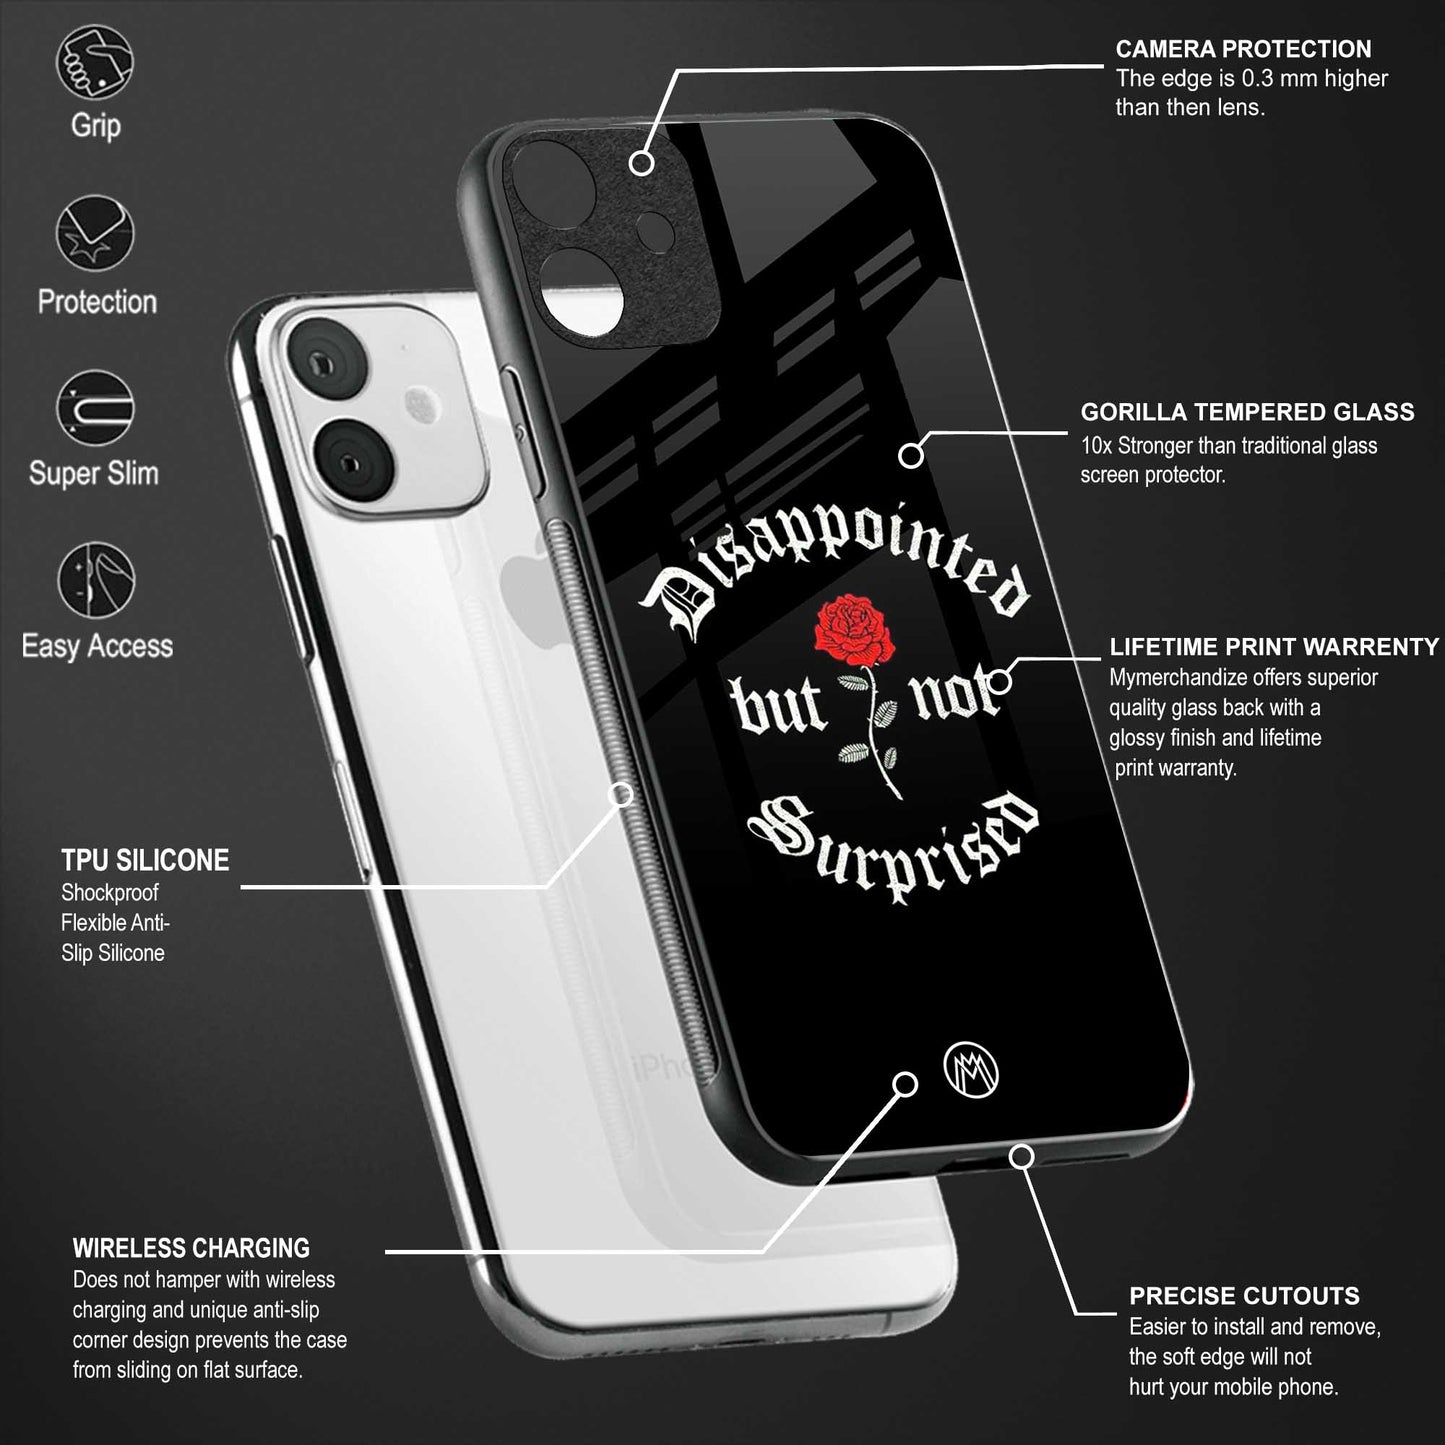 disappointed but not surprised back phone cover | glass case for samsun galaxy a24 4g